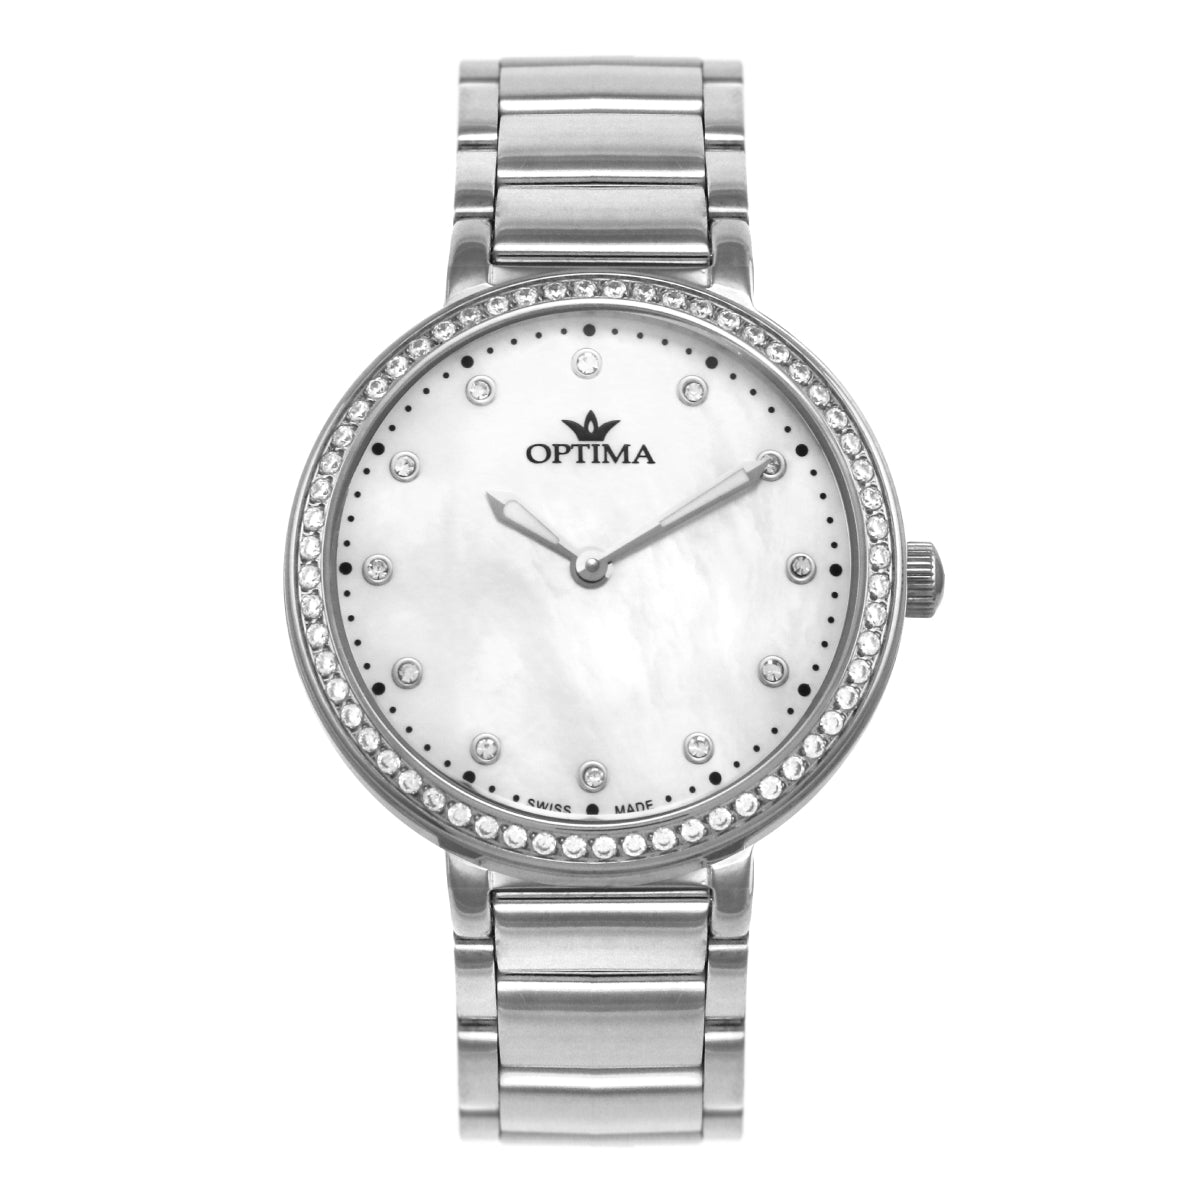 Optima Women's Swiss Quartz Watch with Pearly White Dial - OPT-0031